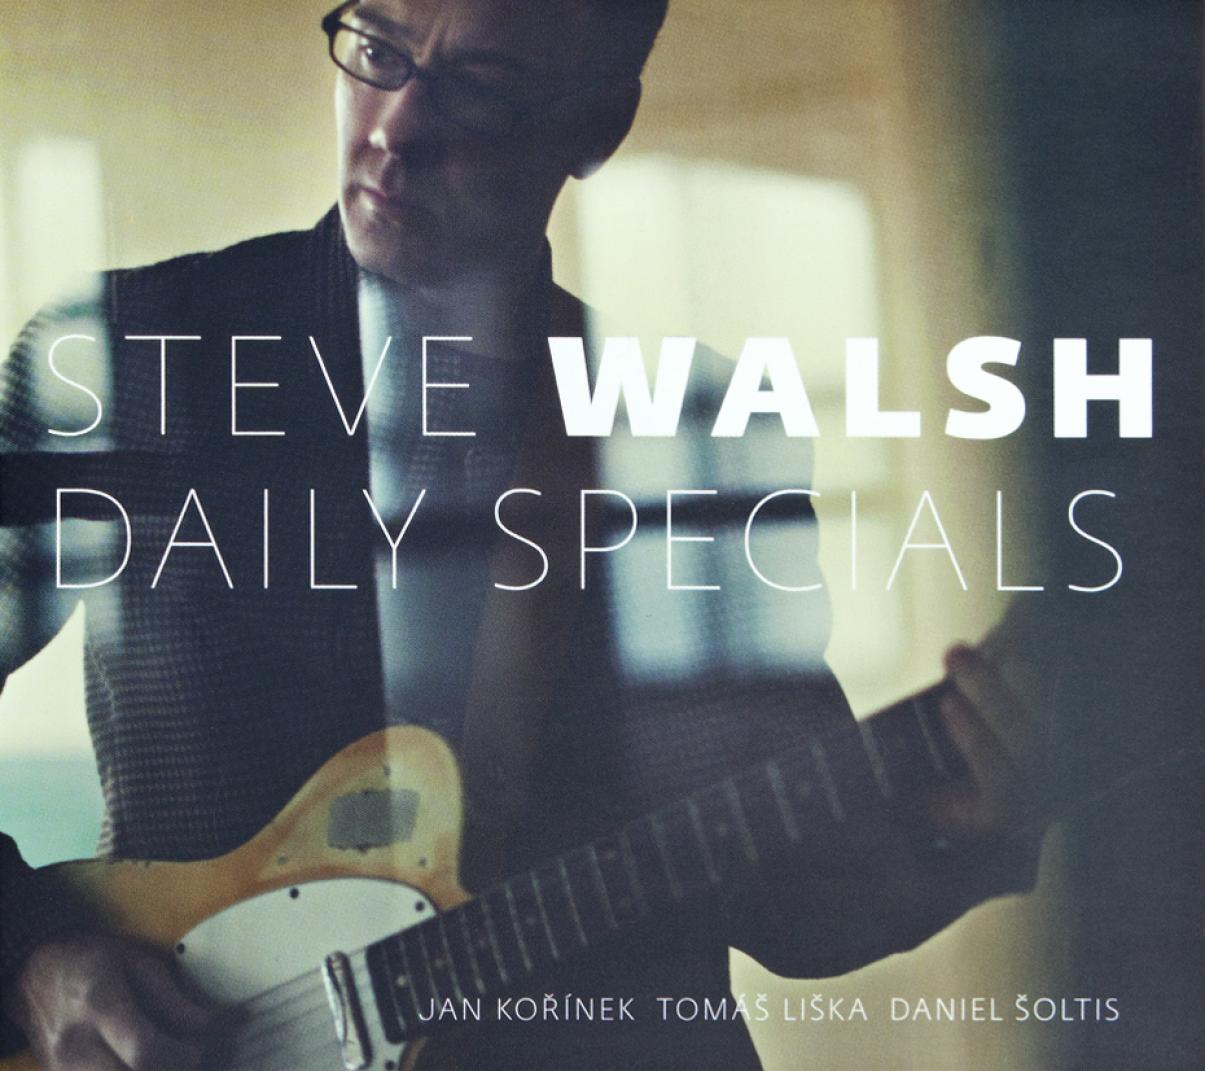 Steve Walsh: Daily Specials